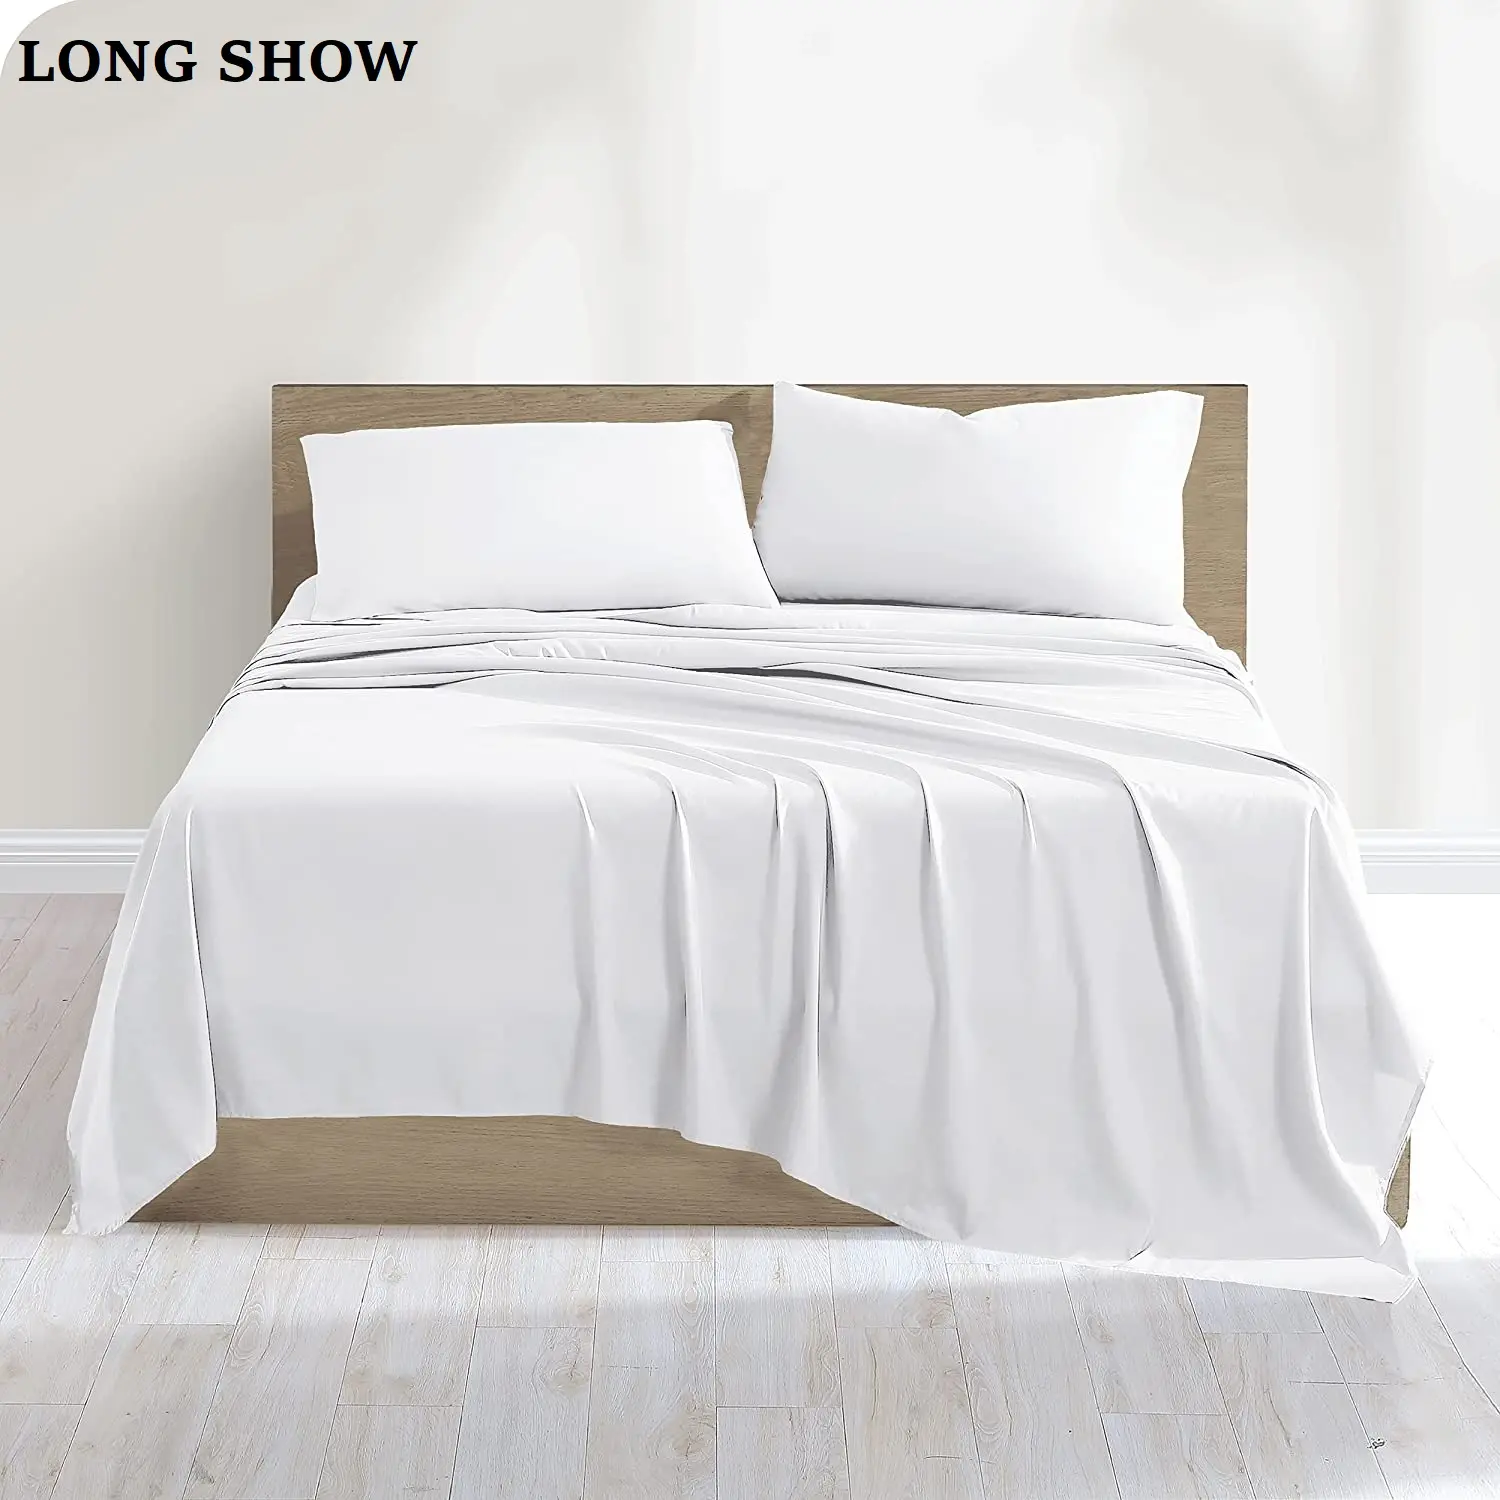 China Factory Wholesale hotel bedsheets Luxury 5 Star Hotel bed linen 100% cotton flat sheet white